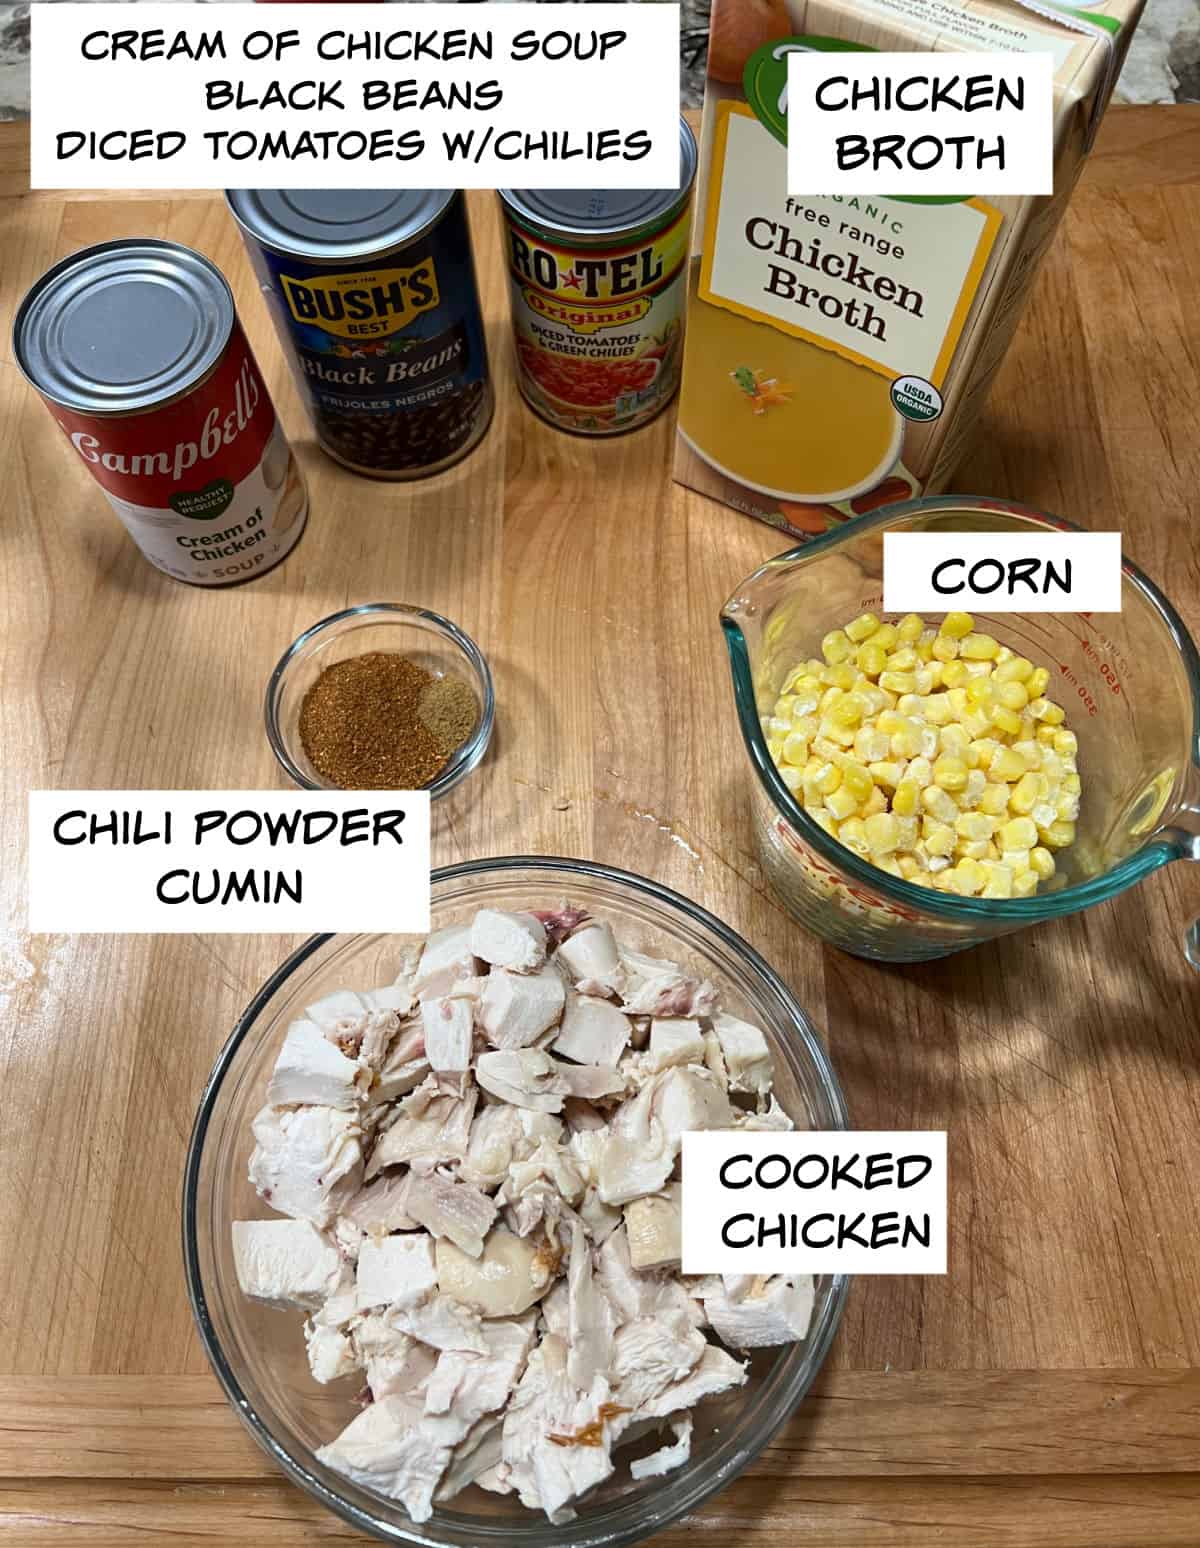 Ingredients: cream of chicken soup, black beans, diced tomatoes with chilies, chicken broth, corn, chili powder, cumin, and cooked chicken.